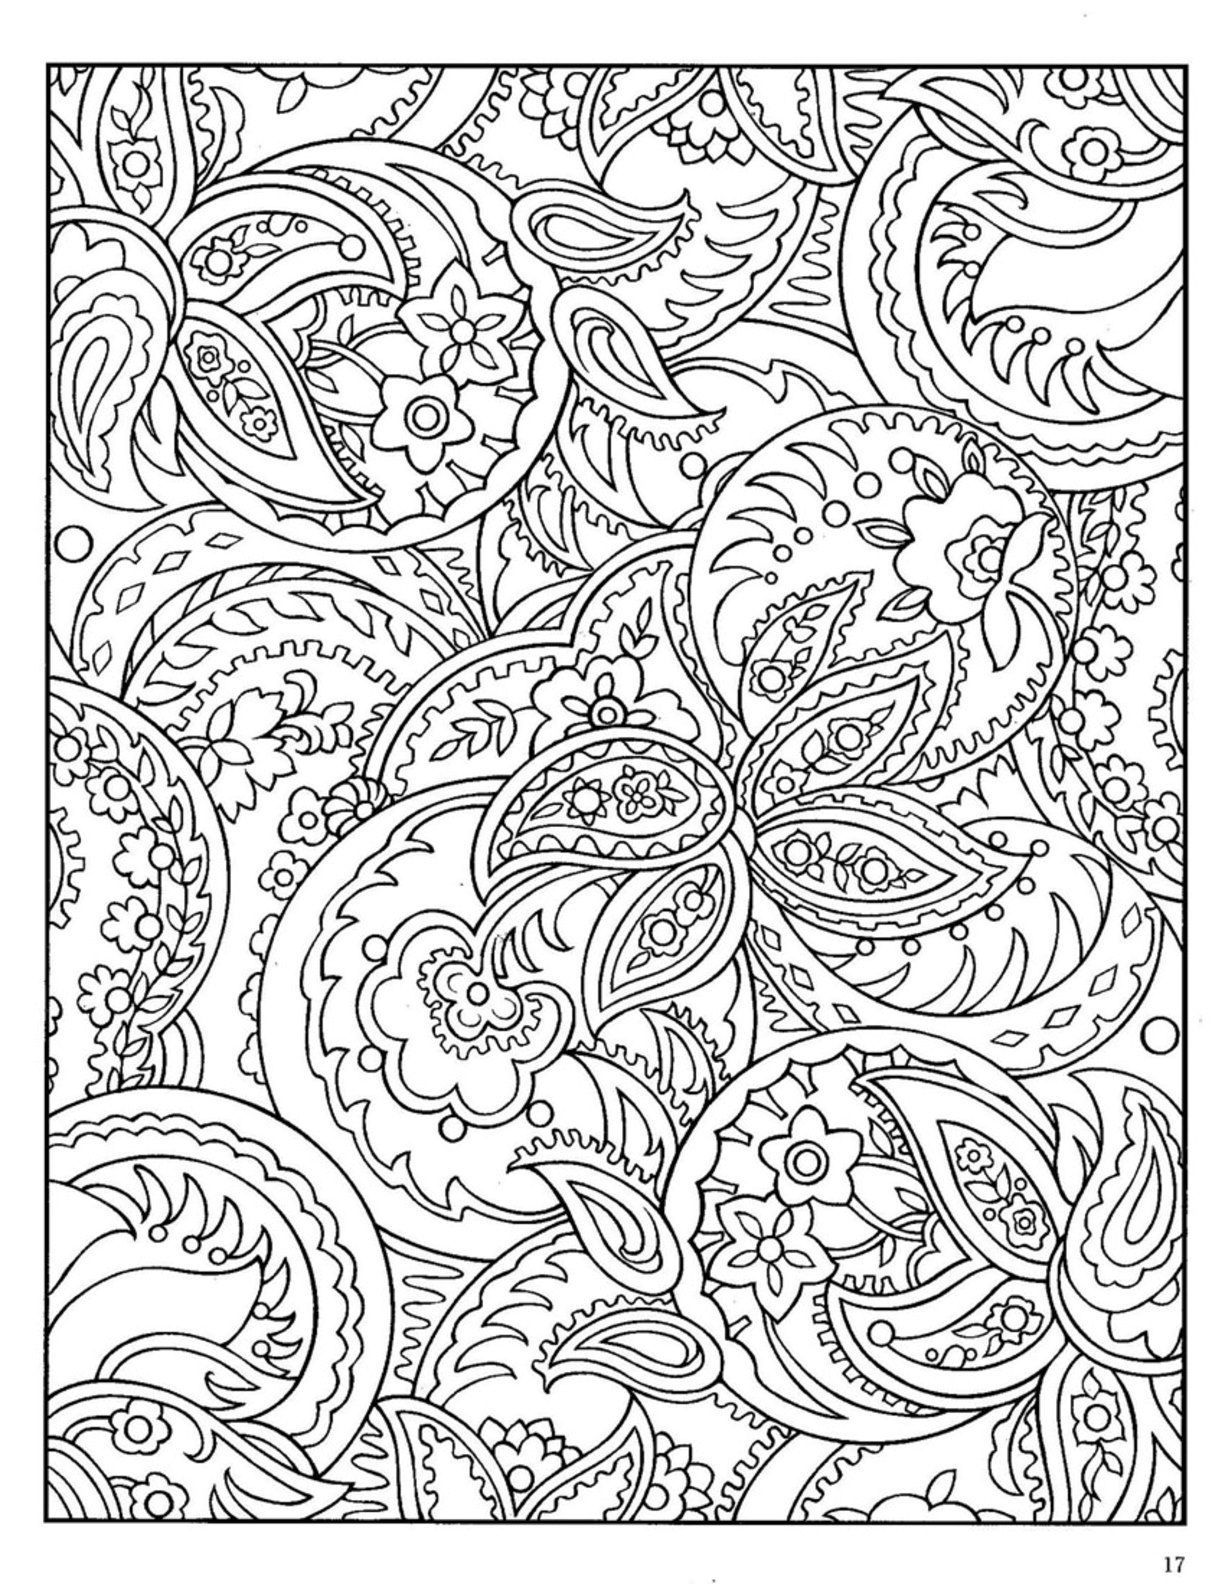 paisley design coloring pages | Best Coloring Page Site